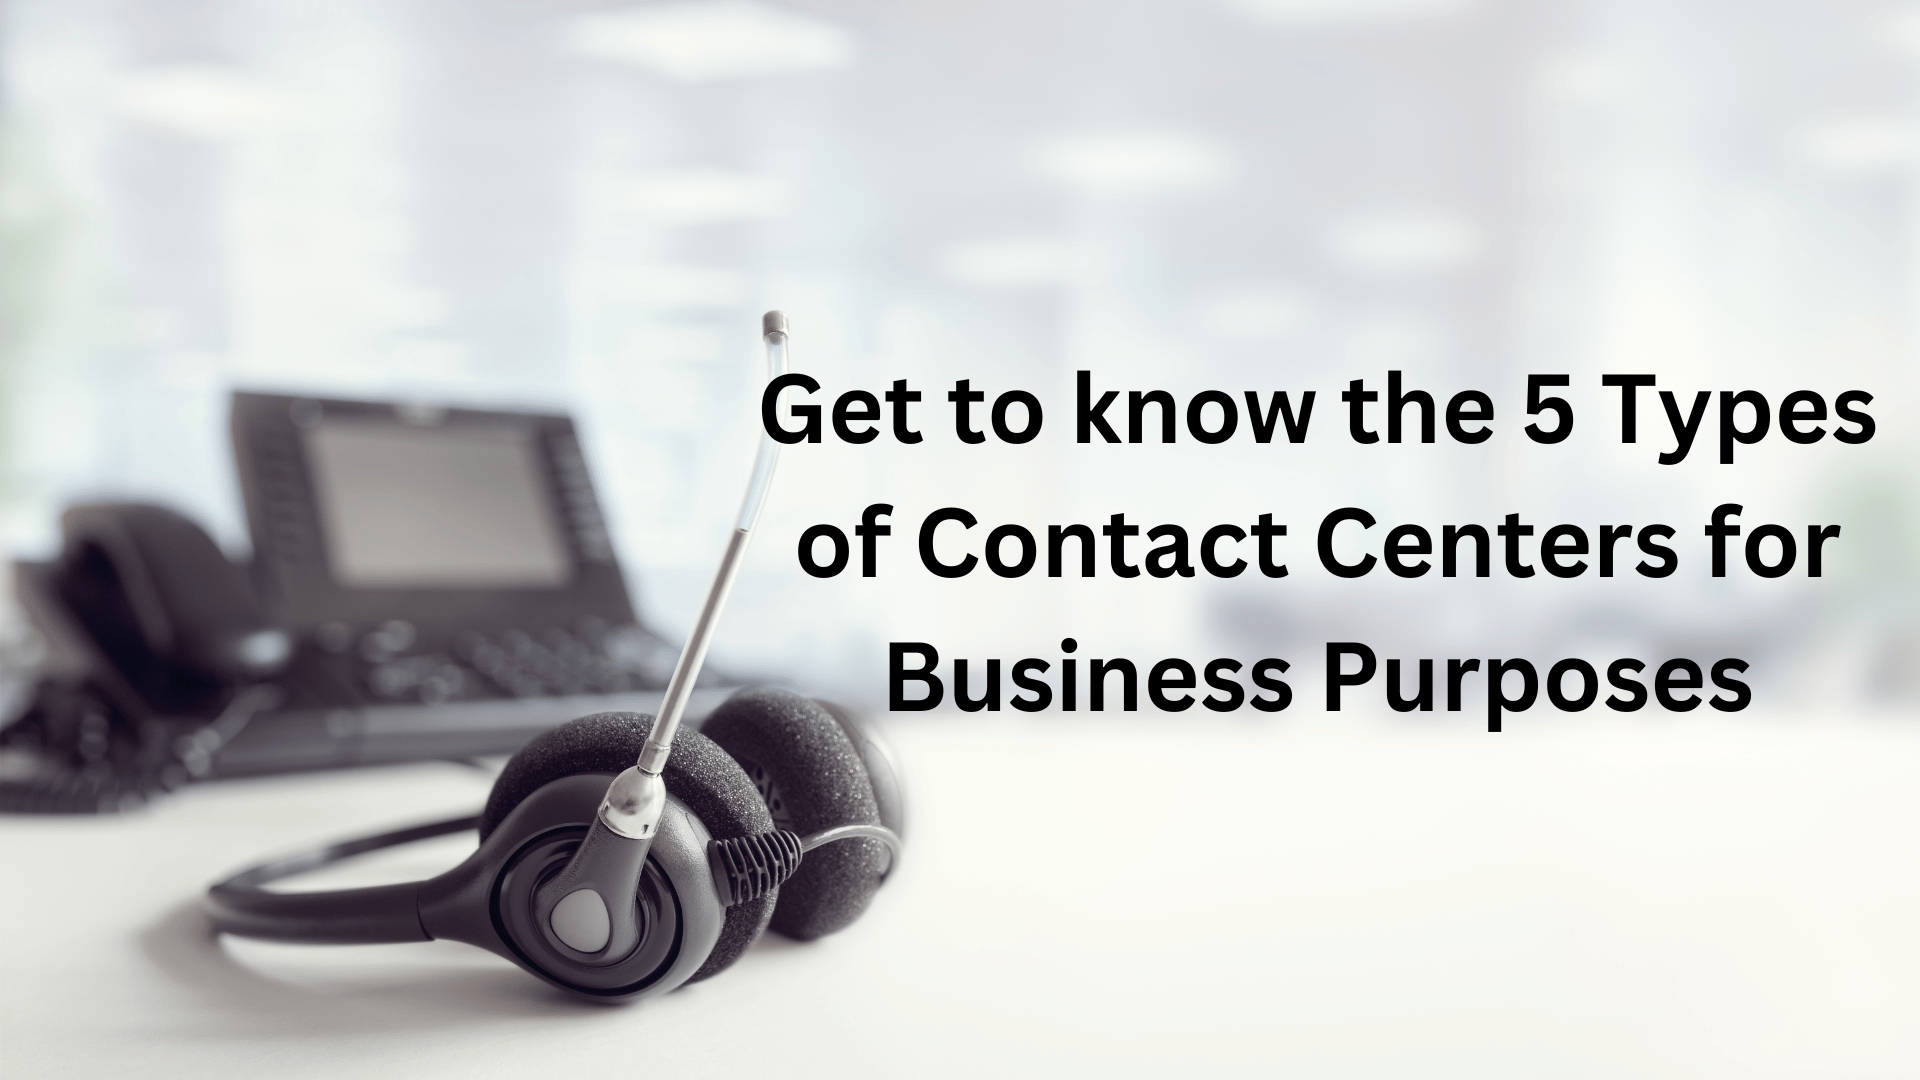 Image of Get to know the 5 Types of Contact Centers for Business Purposes